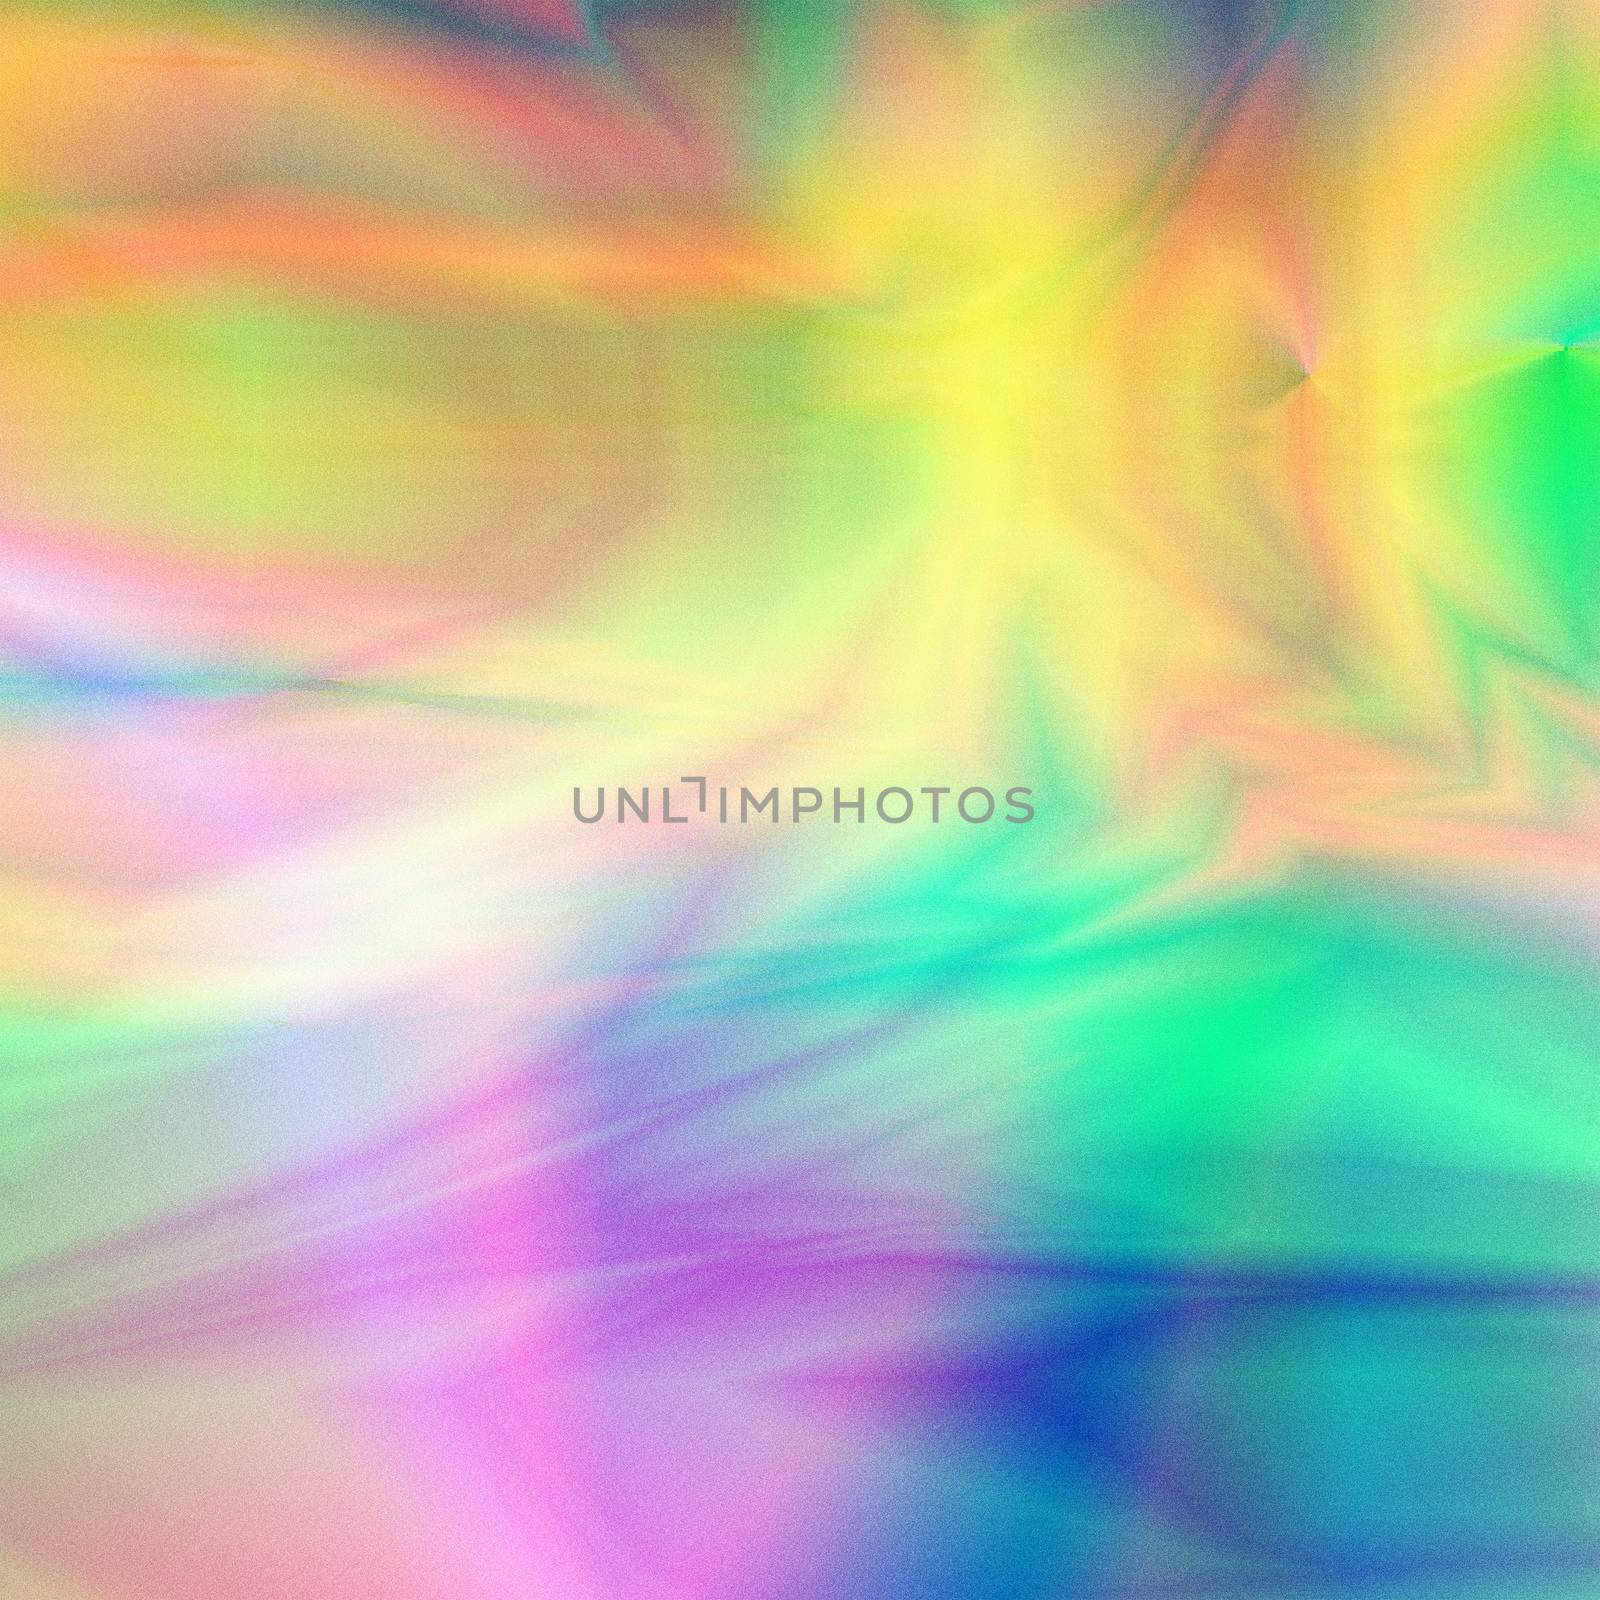 Colorful abstract glitched background for designs. Digital image data distortion with gradient